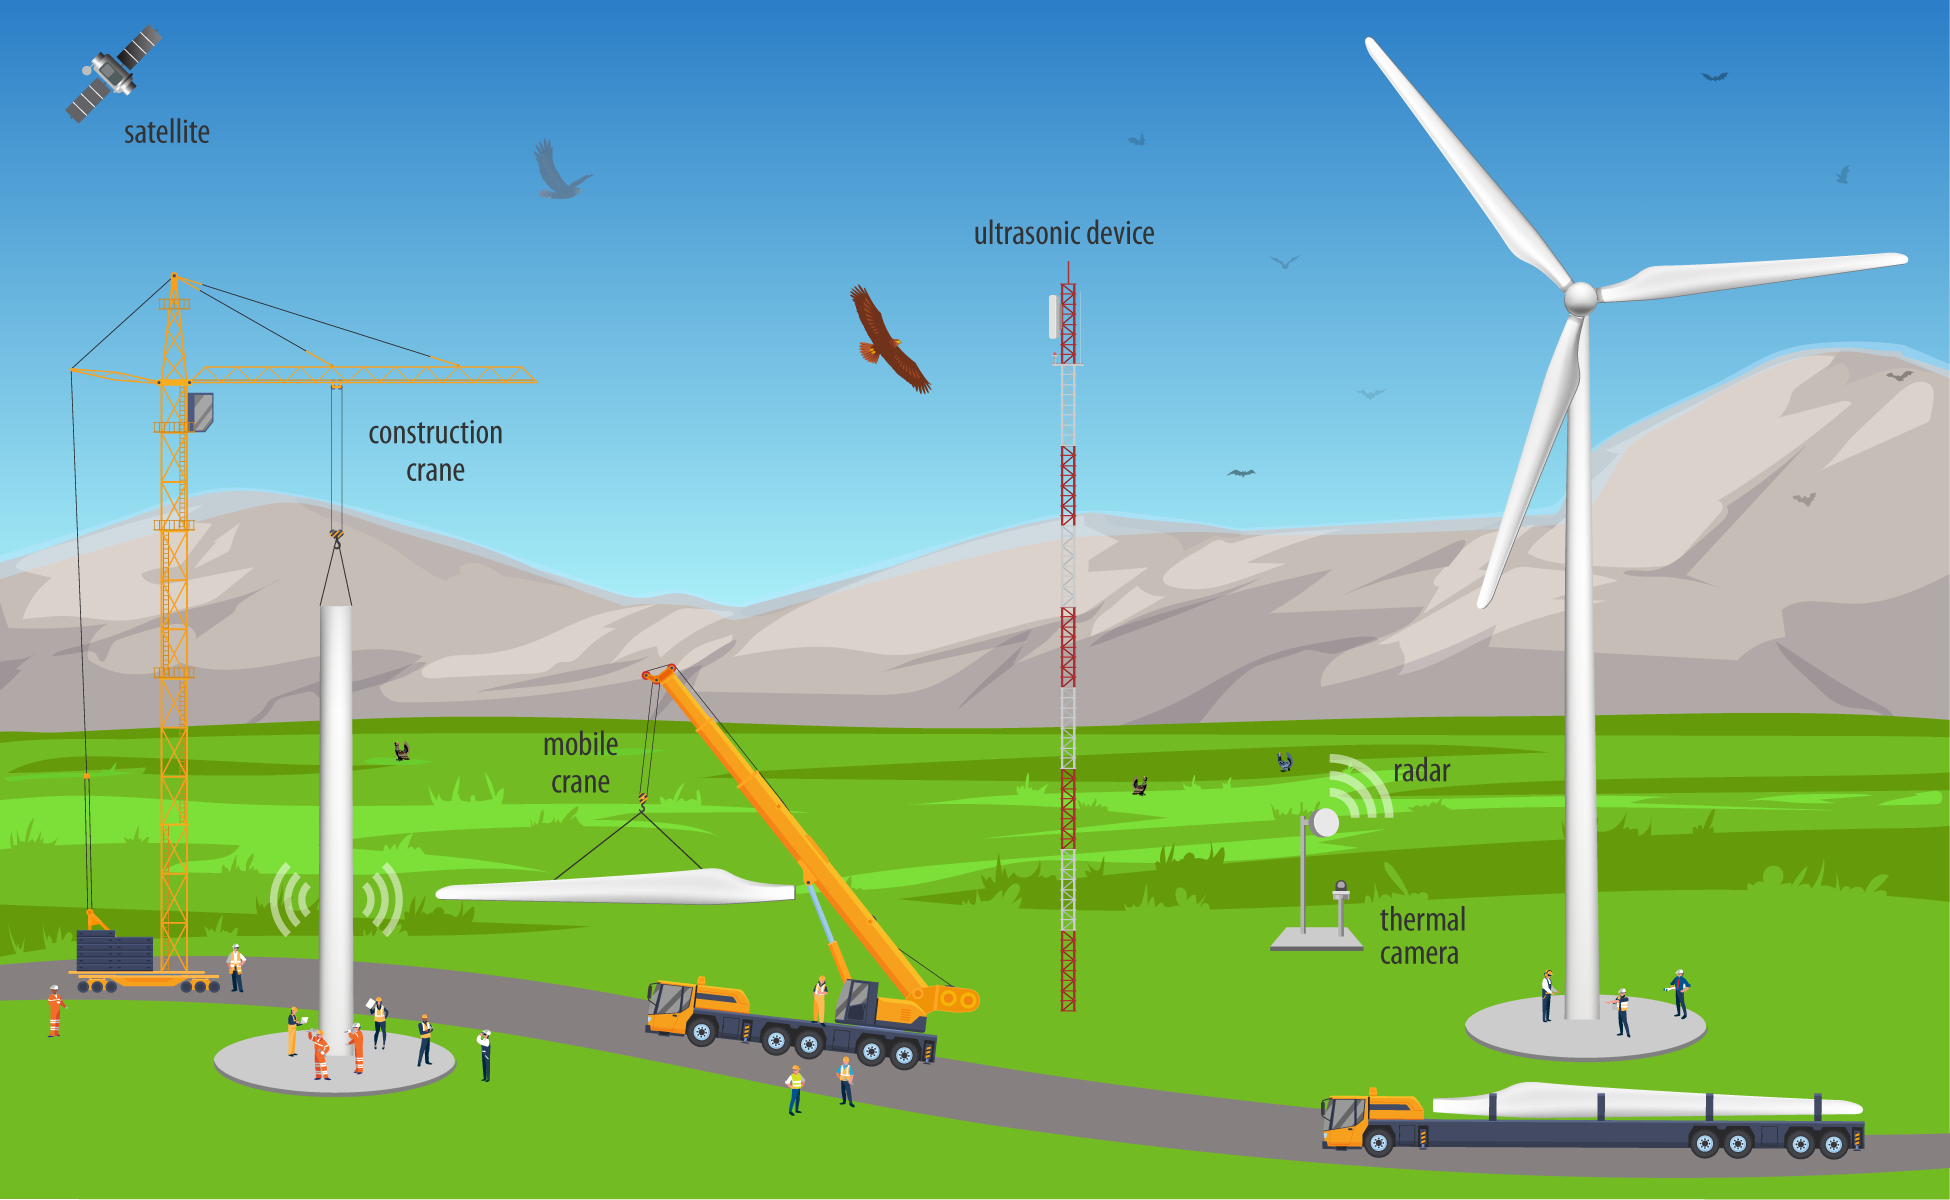 Golden eagles and bats fly in the background as cranes erect a wind turbine next to another operating one with radar and an ultrasonic device in between